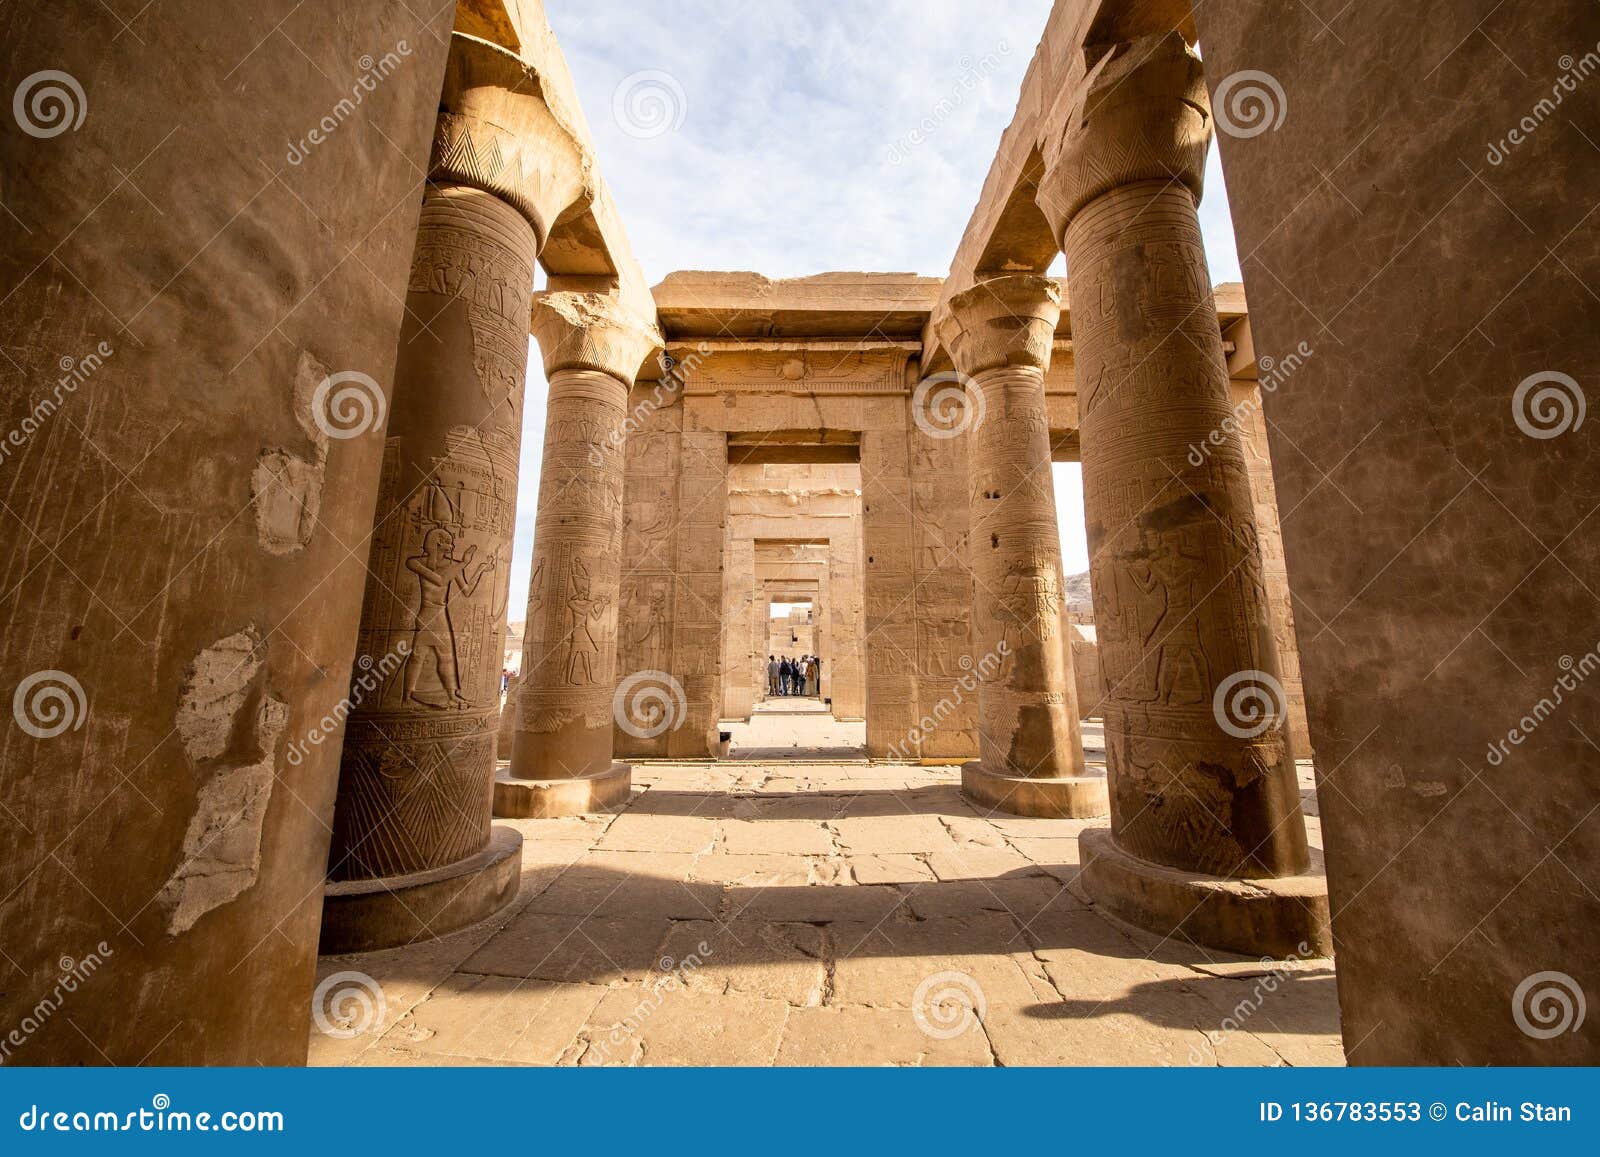 the outside columns of kom ombo temple in aswan constructed during the ptolemaic dynasty